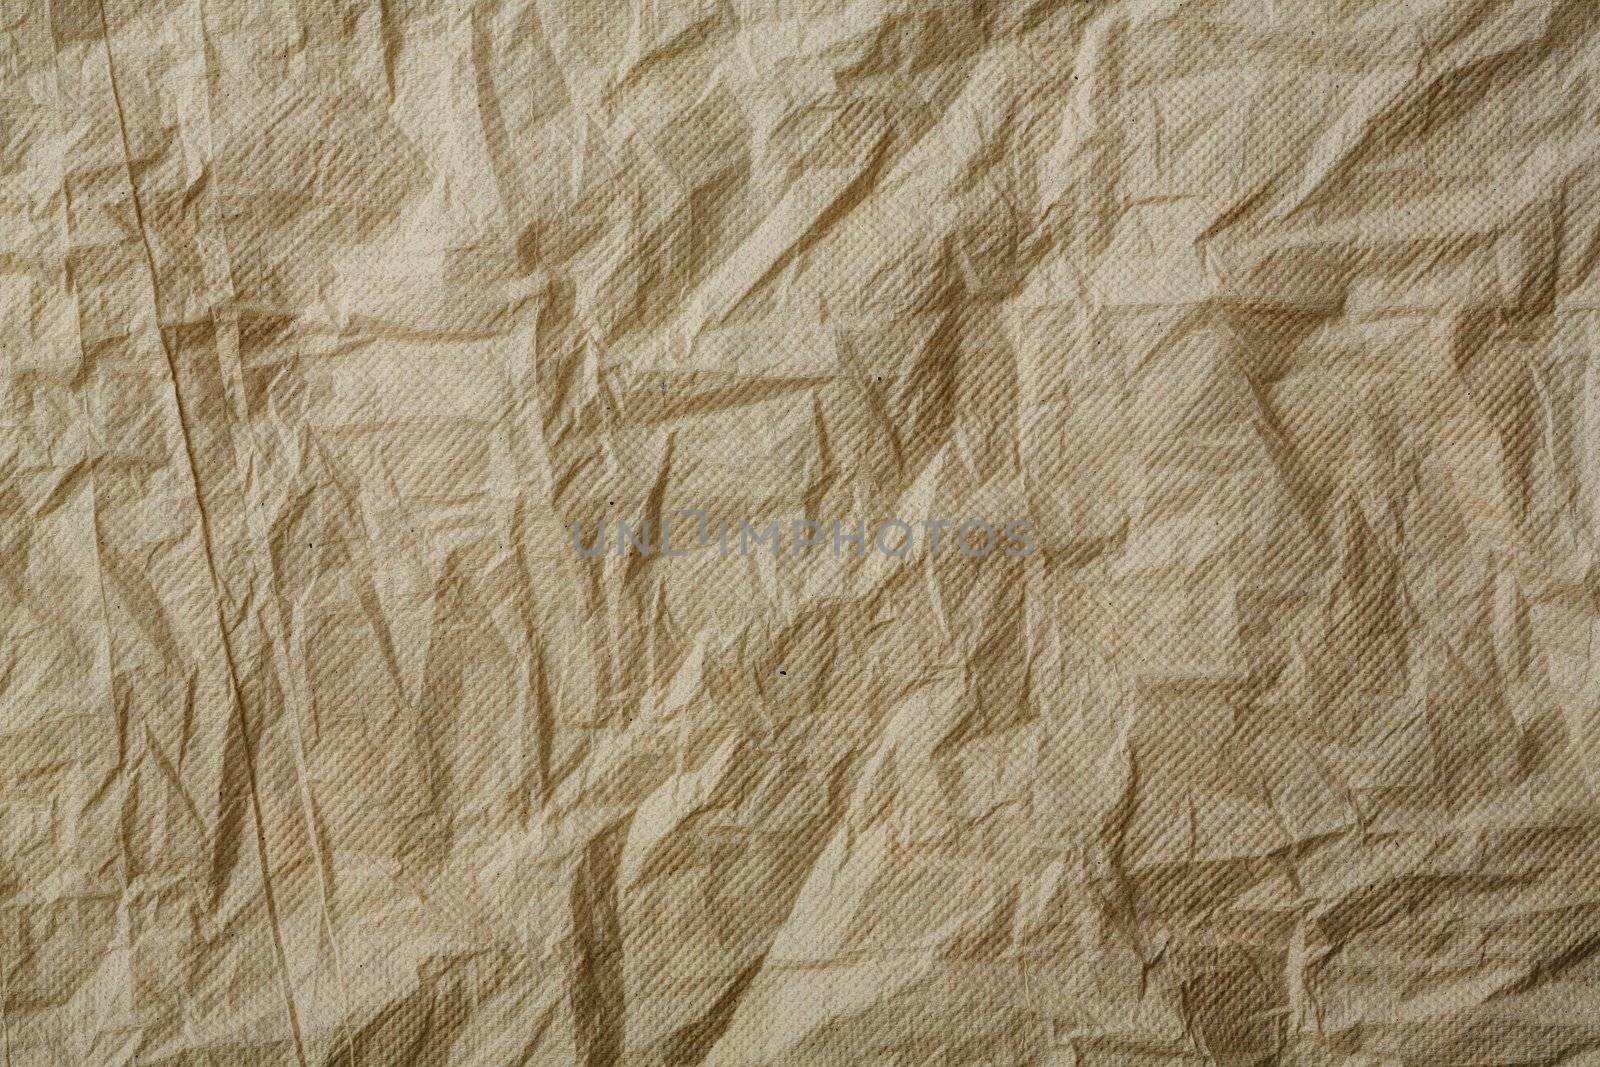 Crumpled grey color tissue paper